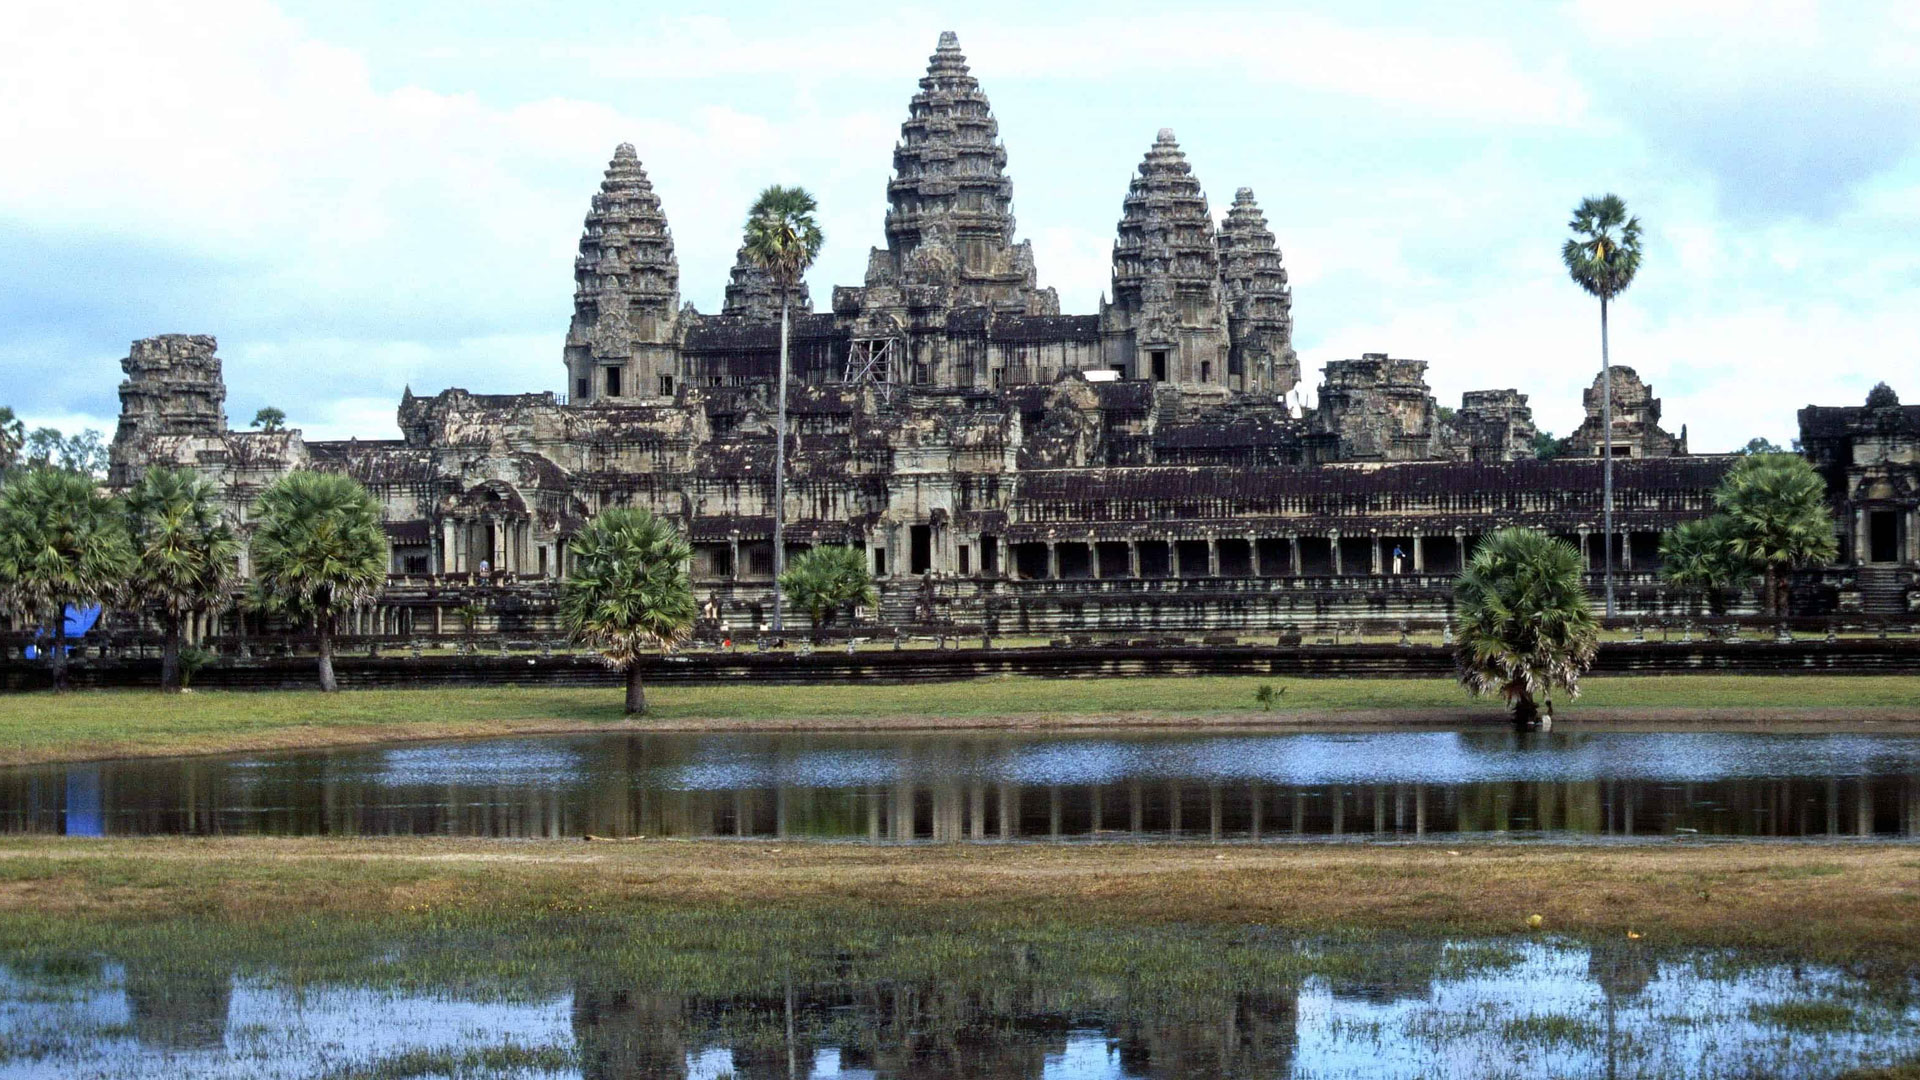 A panoramic view of Angkor Wat temple complex at sunset, representing the top attraction in Cambodia